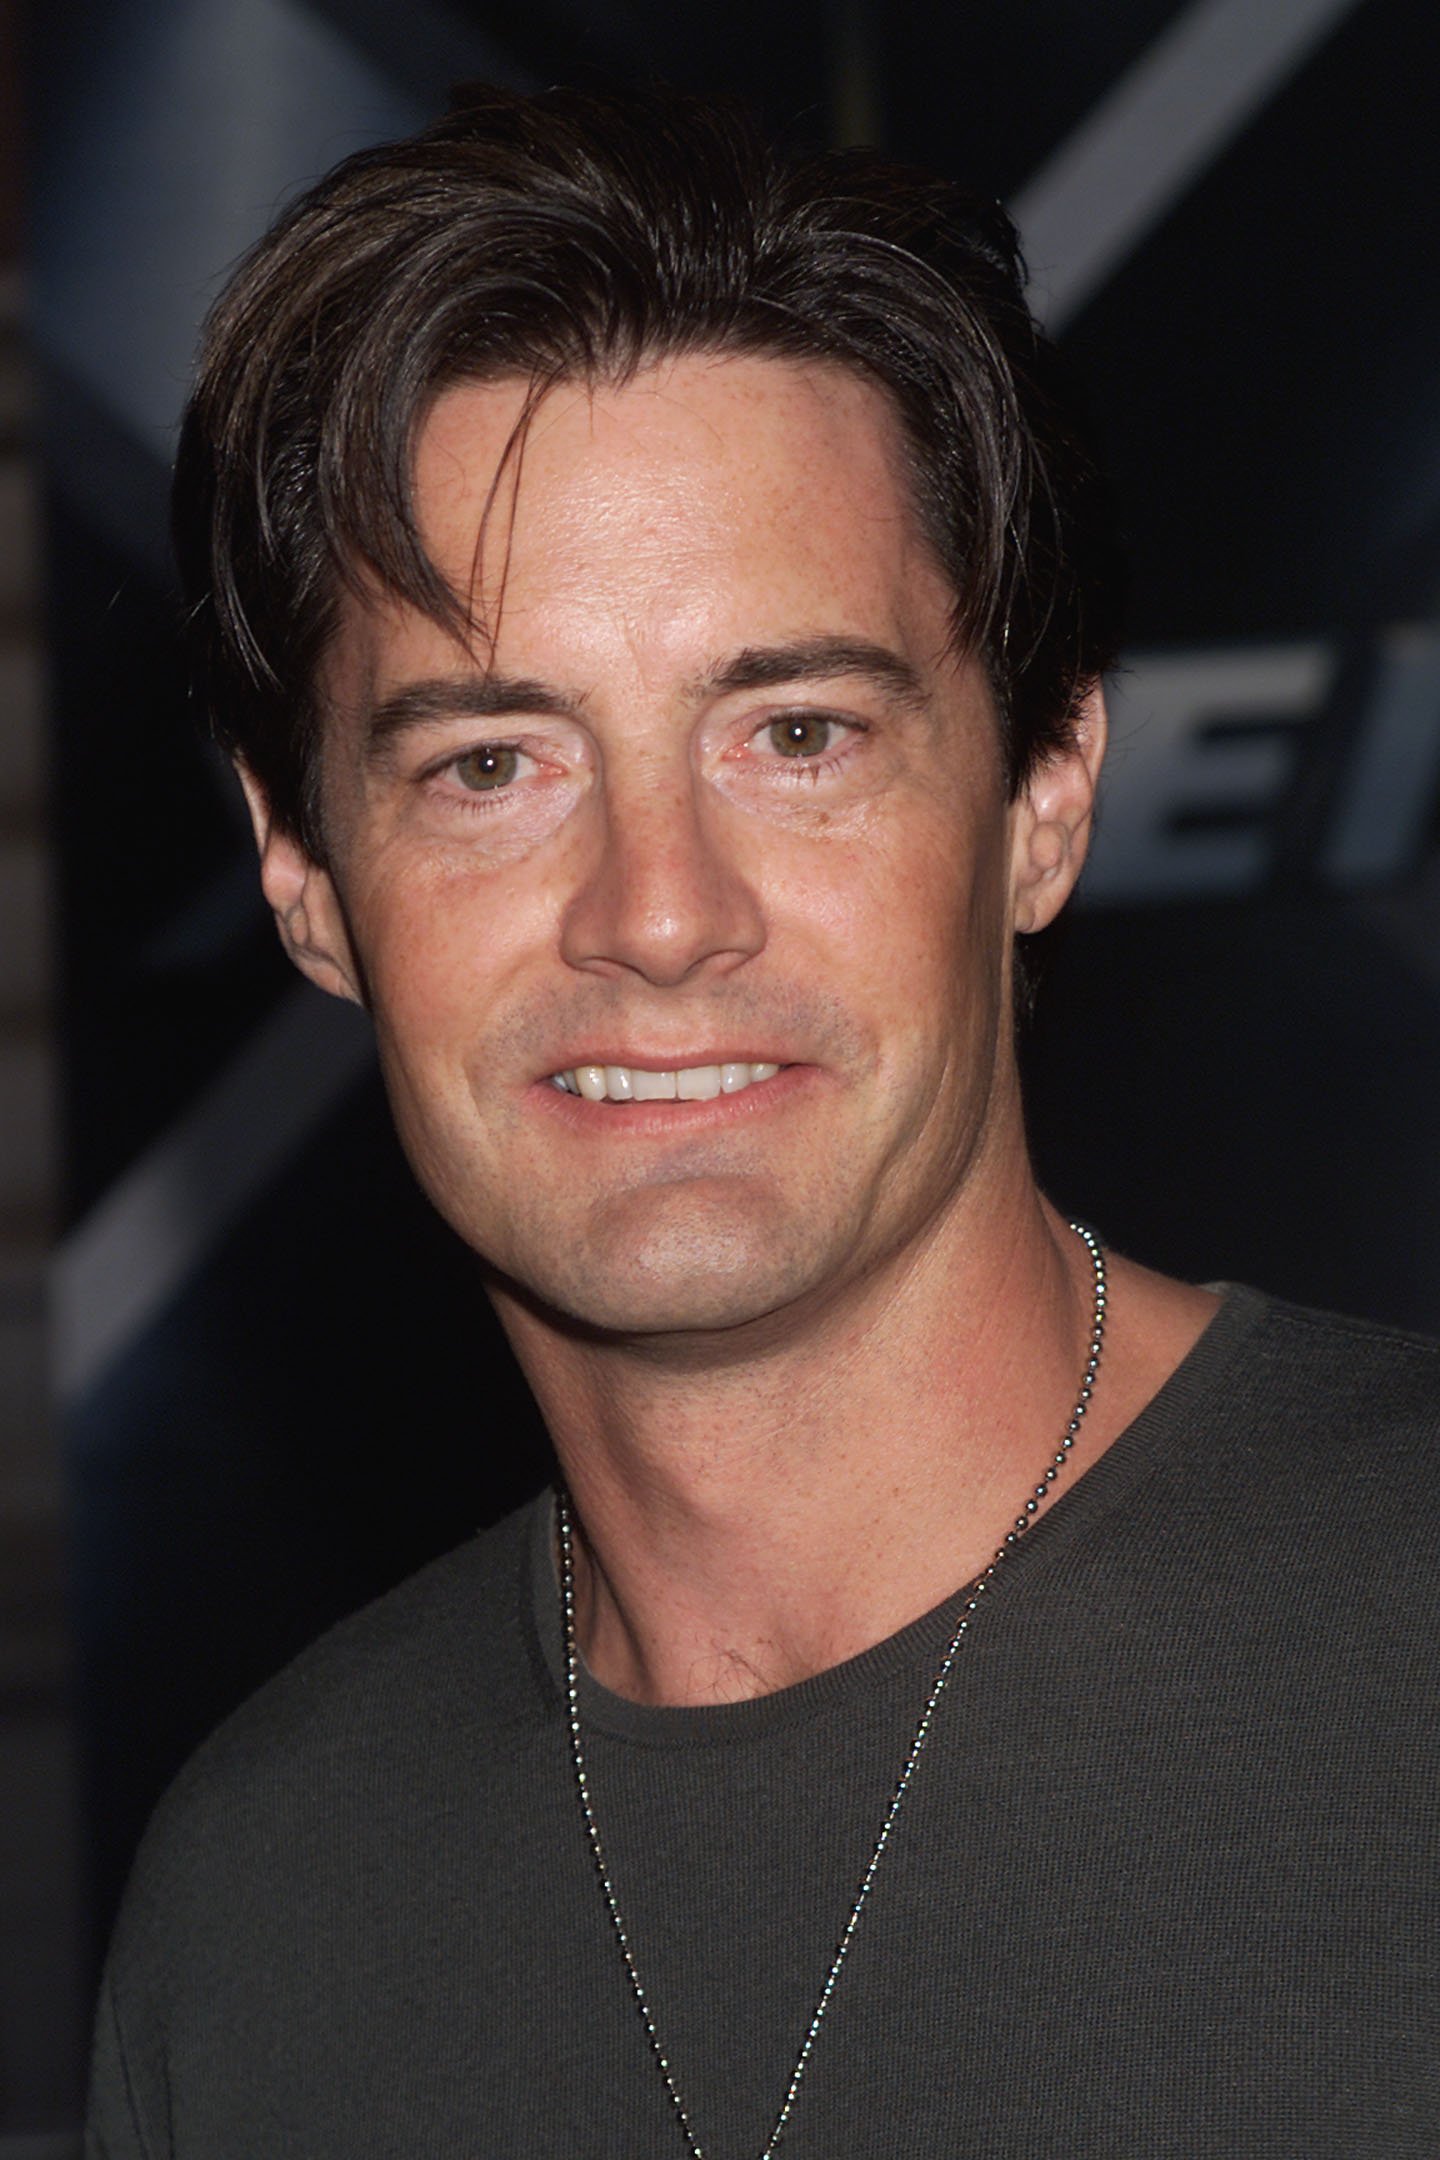 Kyle Maclachlan at 'X-Men' Premiere in Nyc on July 12, 2000. | Source: Getty Images.